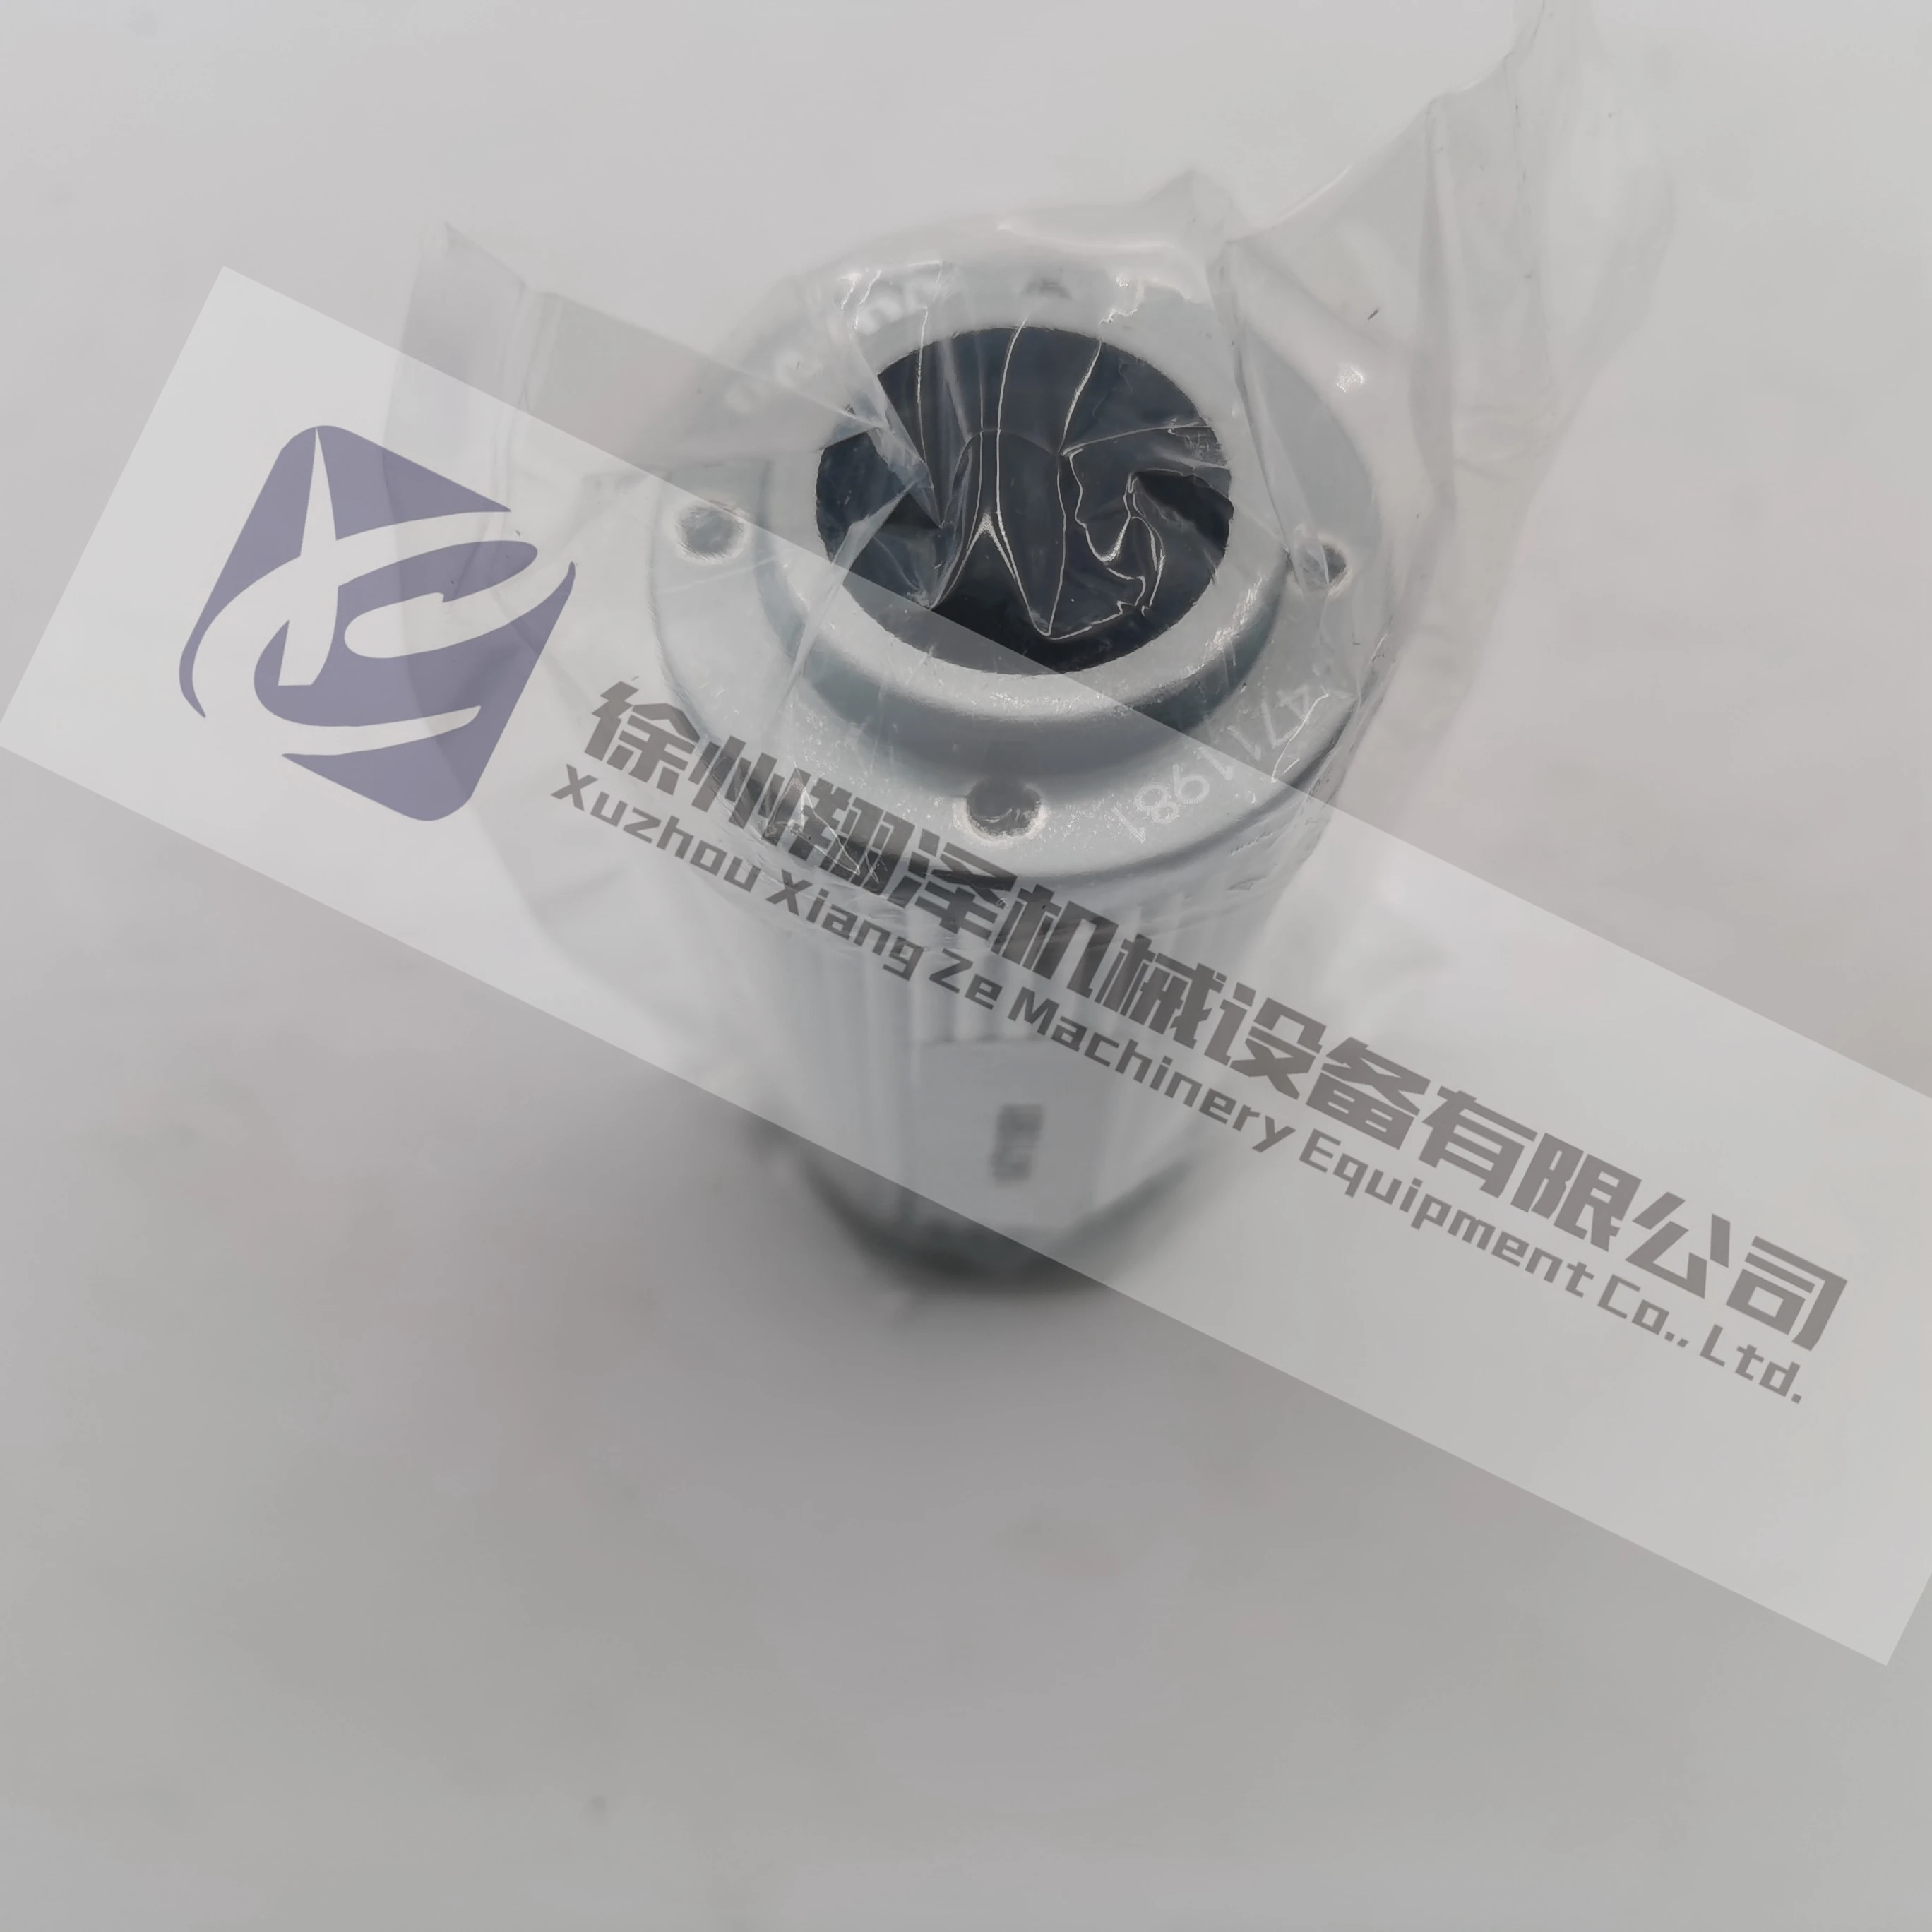 FOR VOLVO 14532686 14711981 HYDRAULIC OIL FILTER HOUSING ELEMENT FOR EXCAVATOR EC180C EC210C EC240C EC290C EC330C EC360C